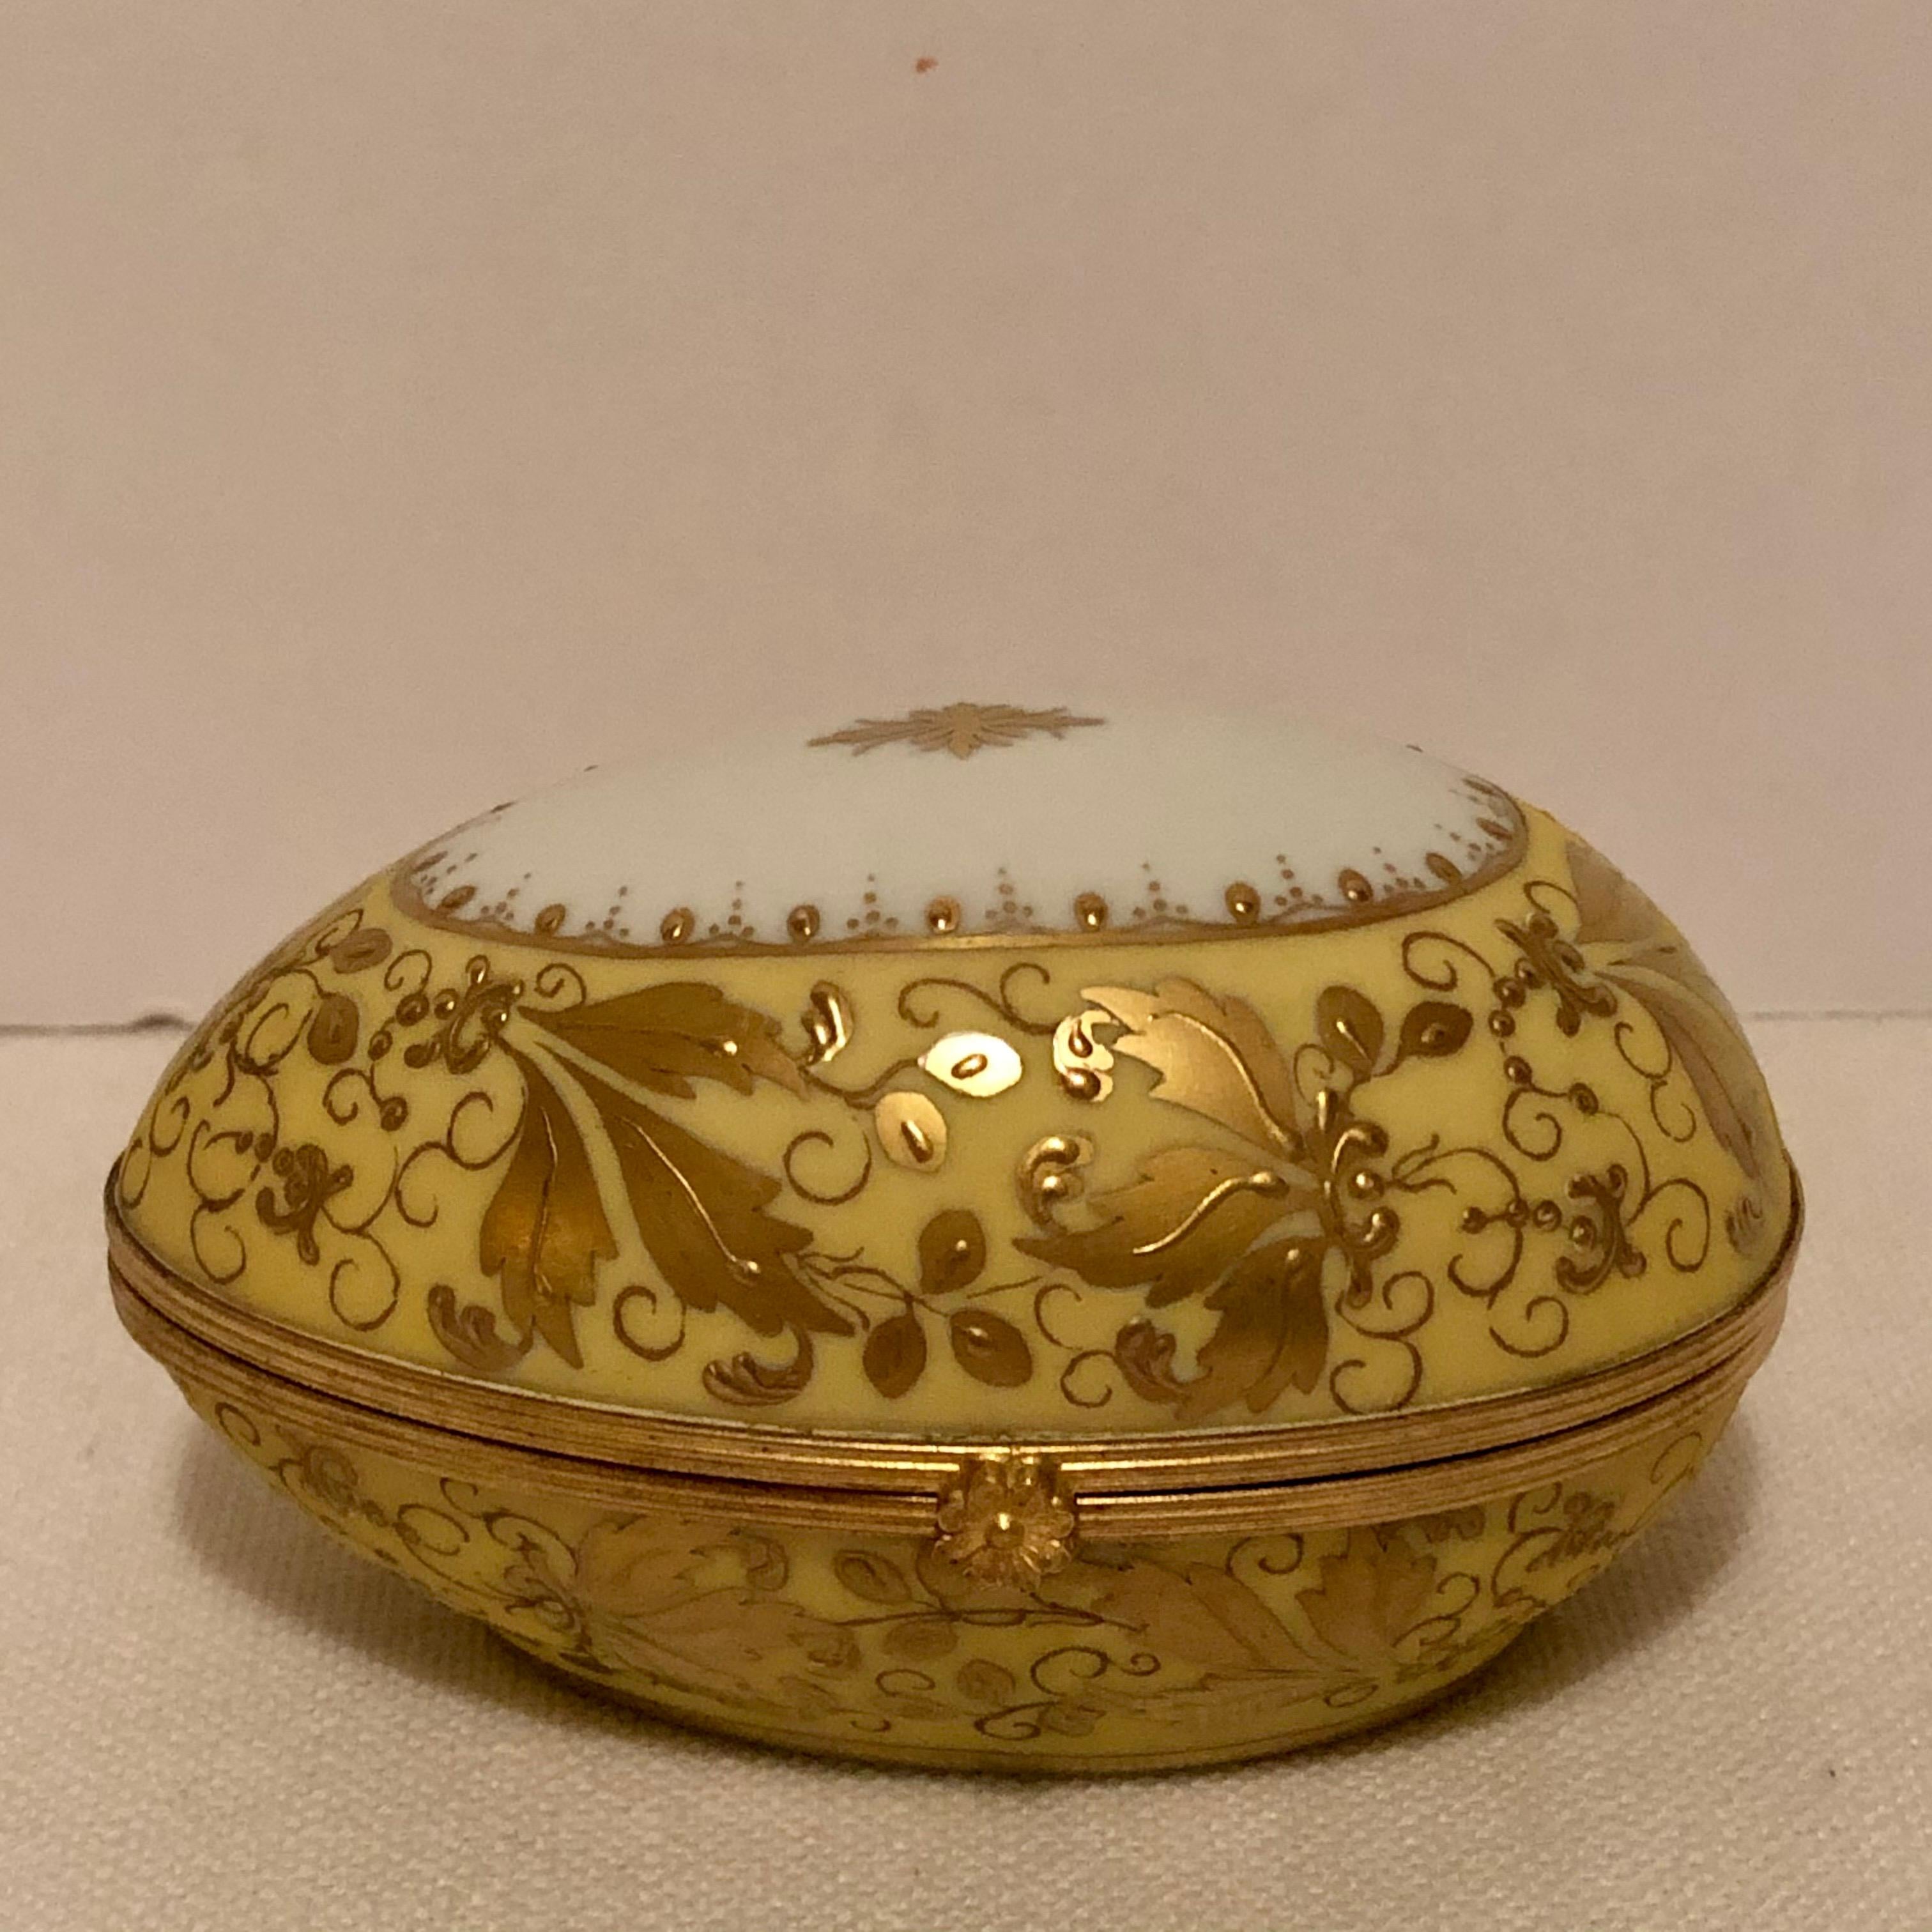 French Le Tallec Porcelain Egg Shaped Box Decorated with Exquisite Raised Gilding